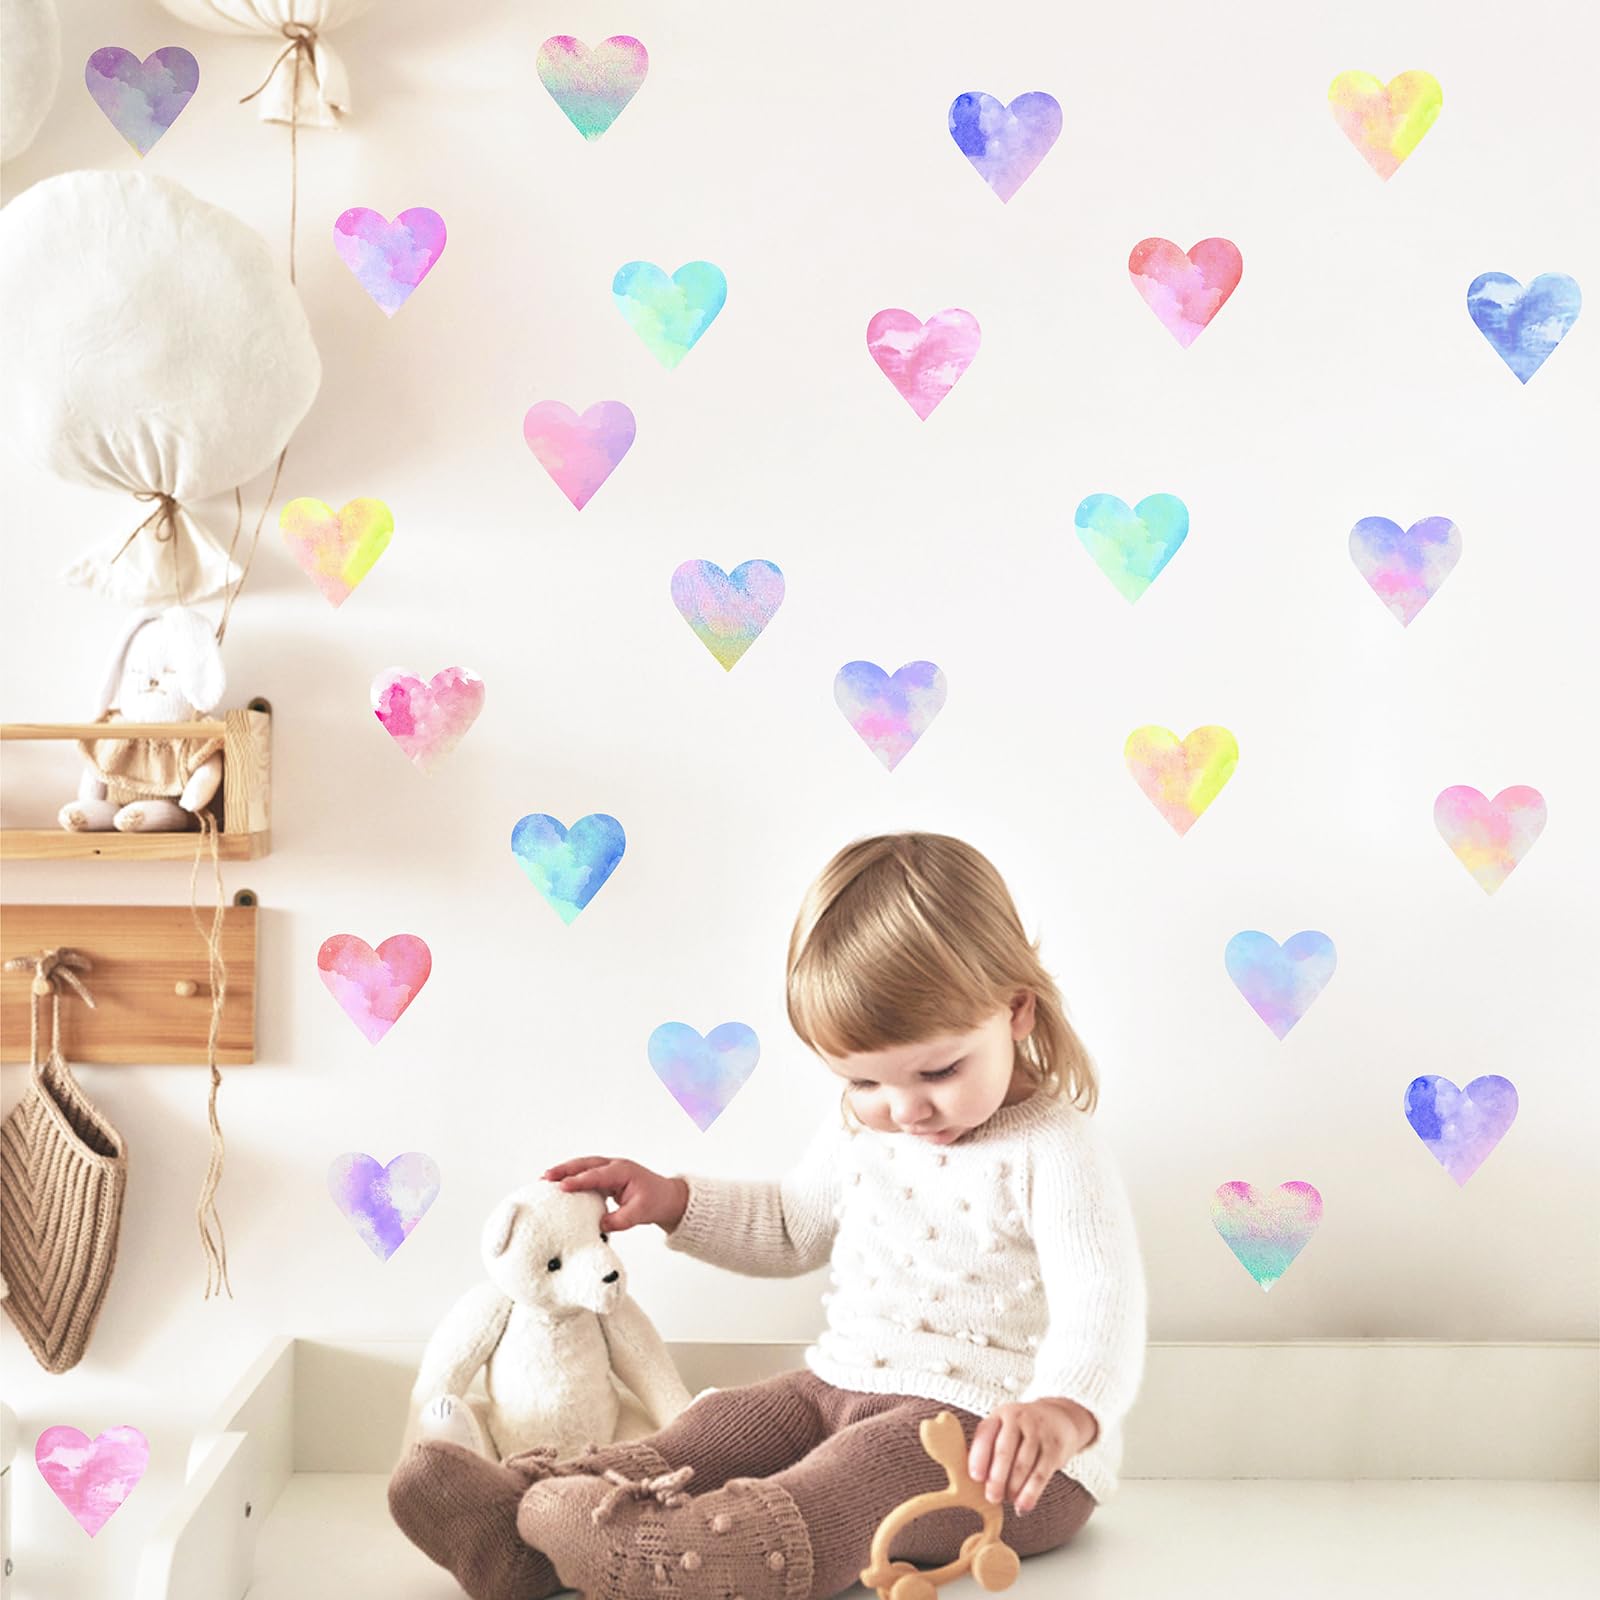 Colorful Heart Wall Decals Peel and Stick Cute Heart Wall Stickers Fabric Wall Stickers Hearts Decals for Walls Watercolor Heart Wall Stickers for Girls Room Bedroom Nursery Decor